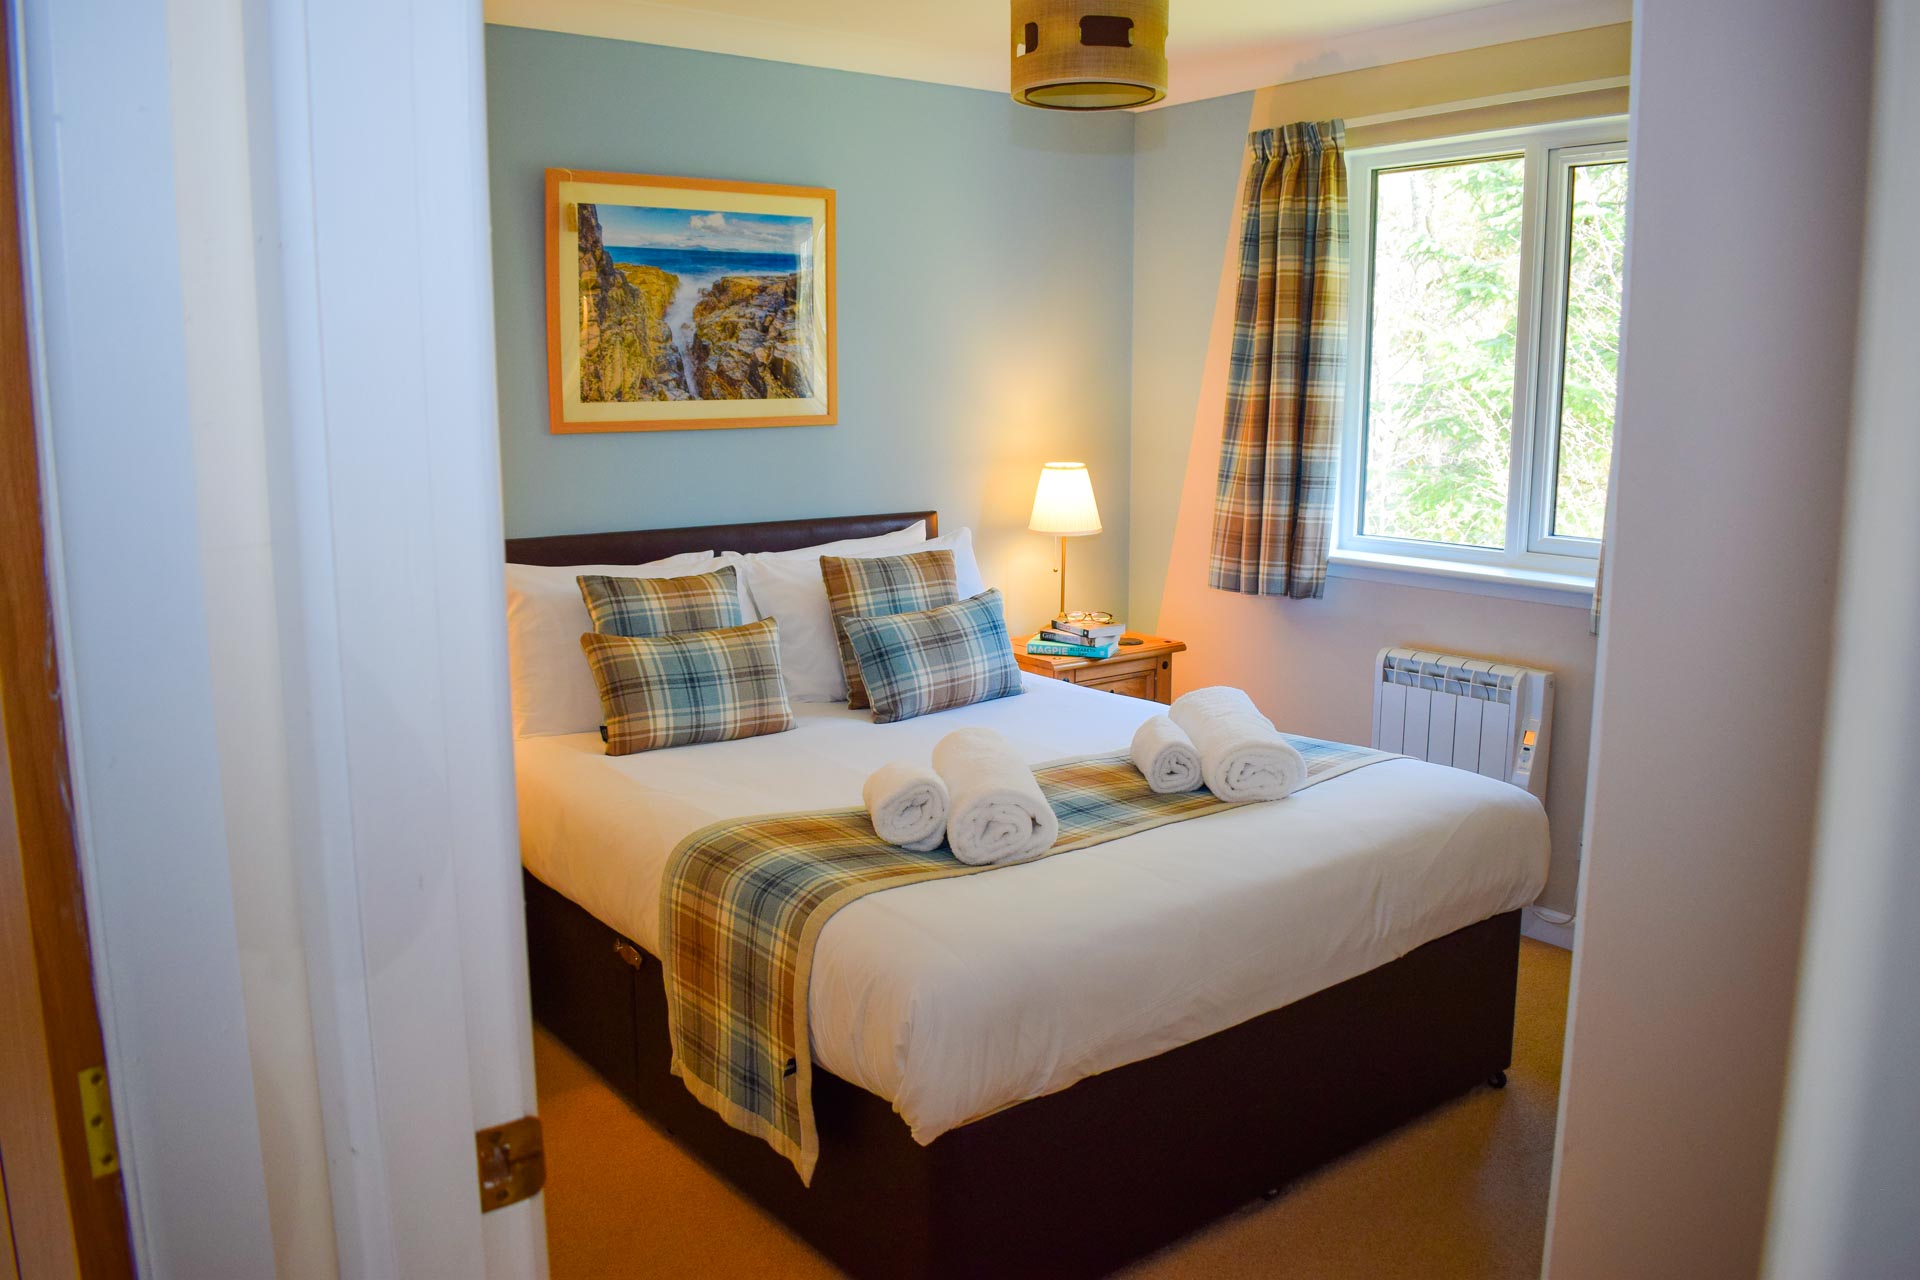 Luxury Self-Catering Lodges in the Highlands of Scotland.